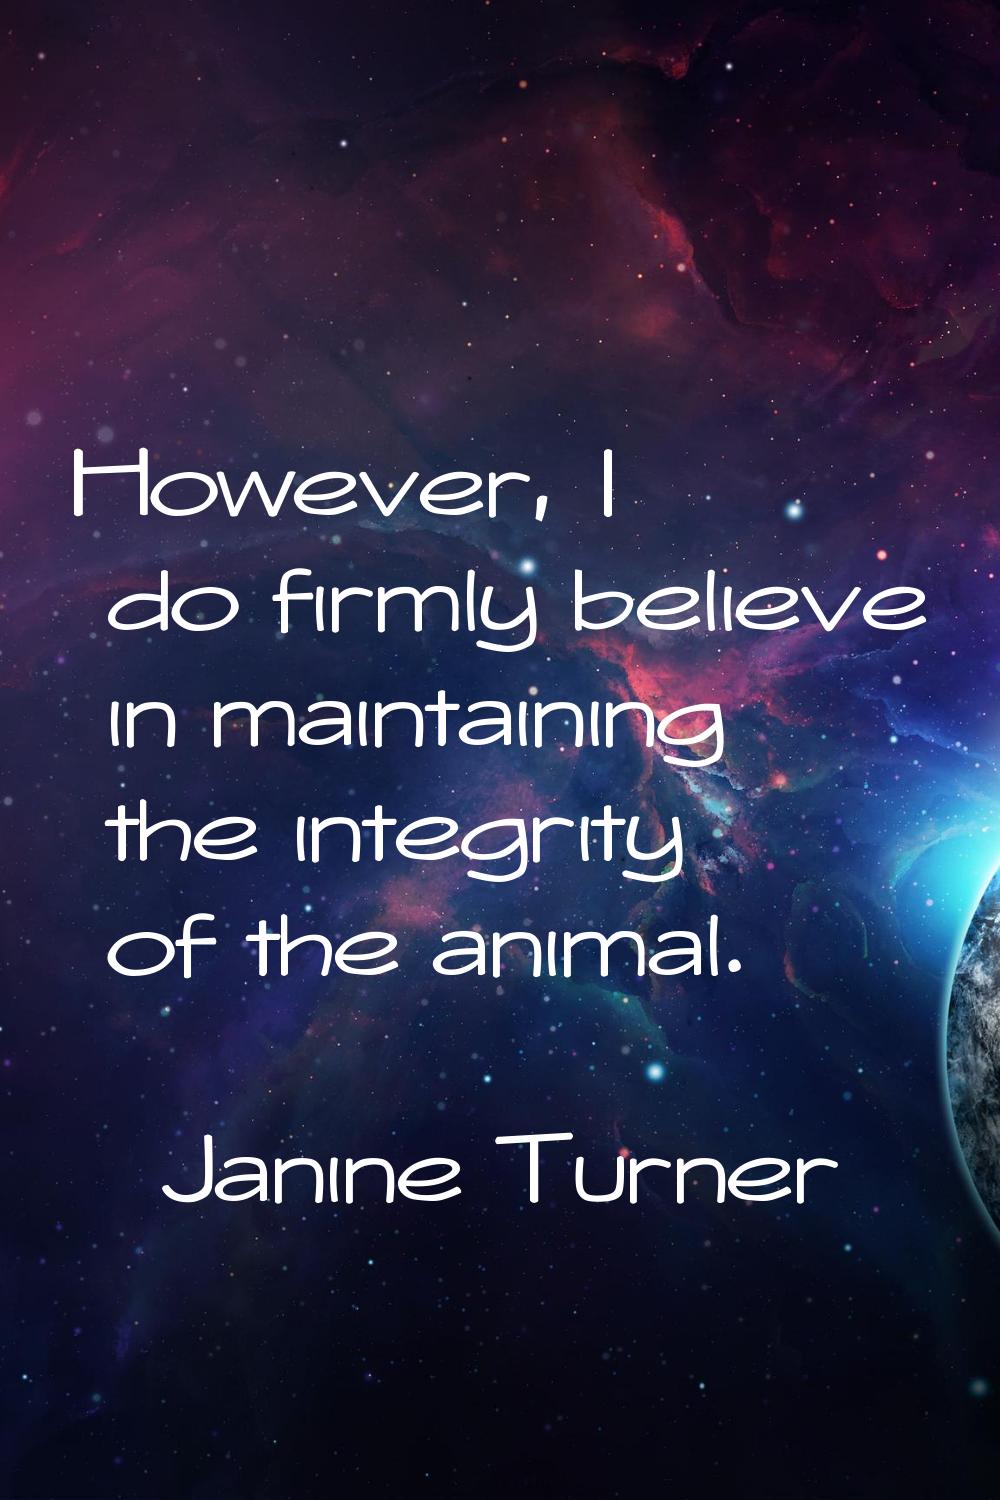 However, I do firmly believe in maintaining the integrity of the animal.